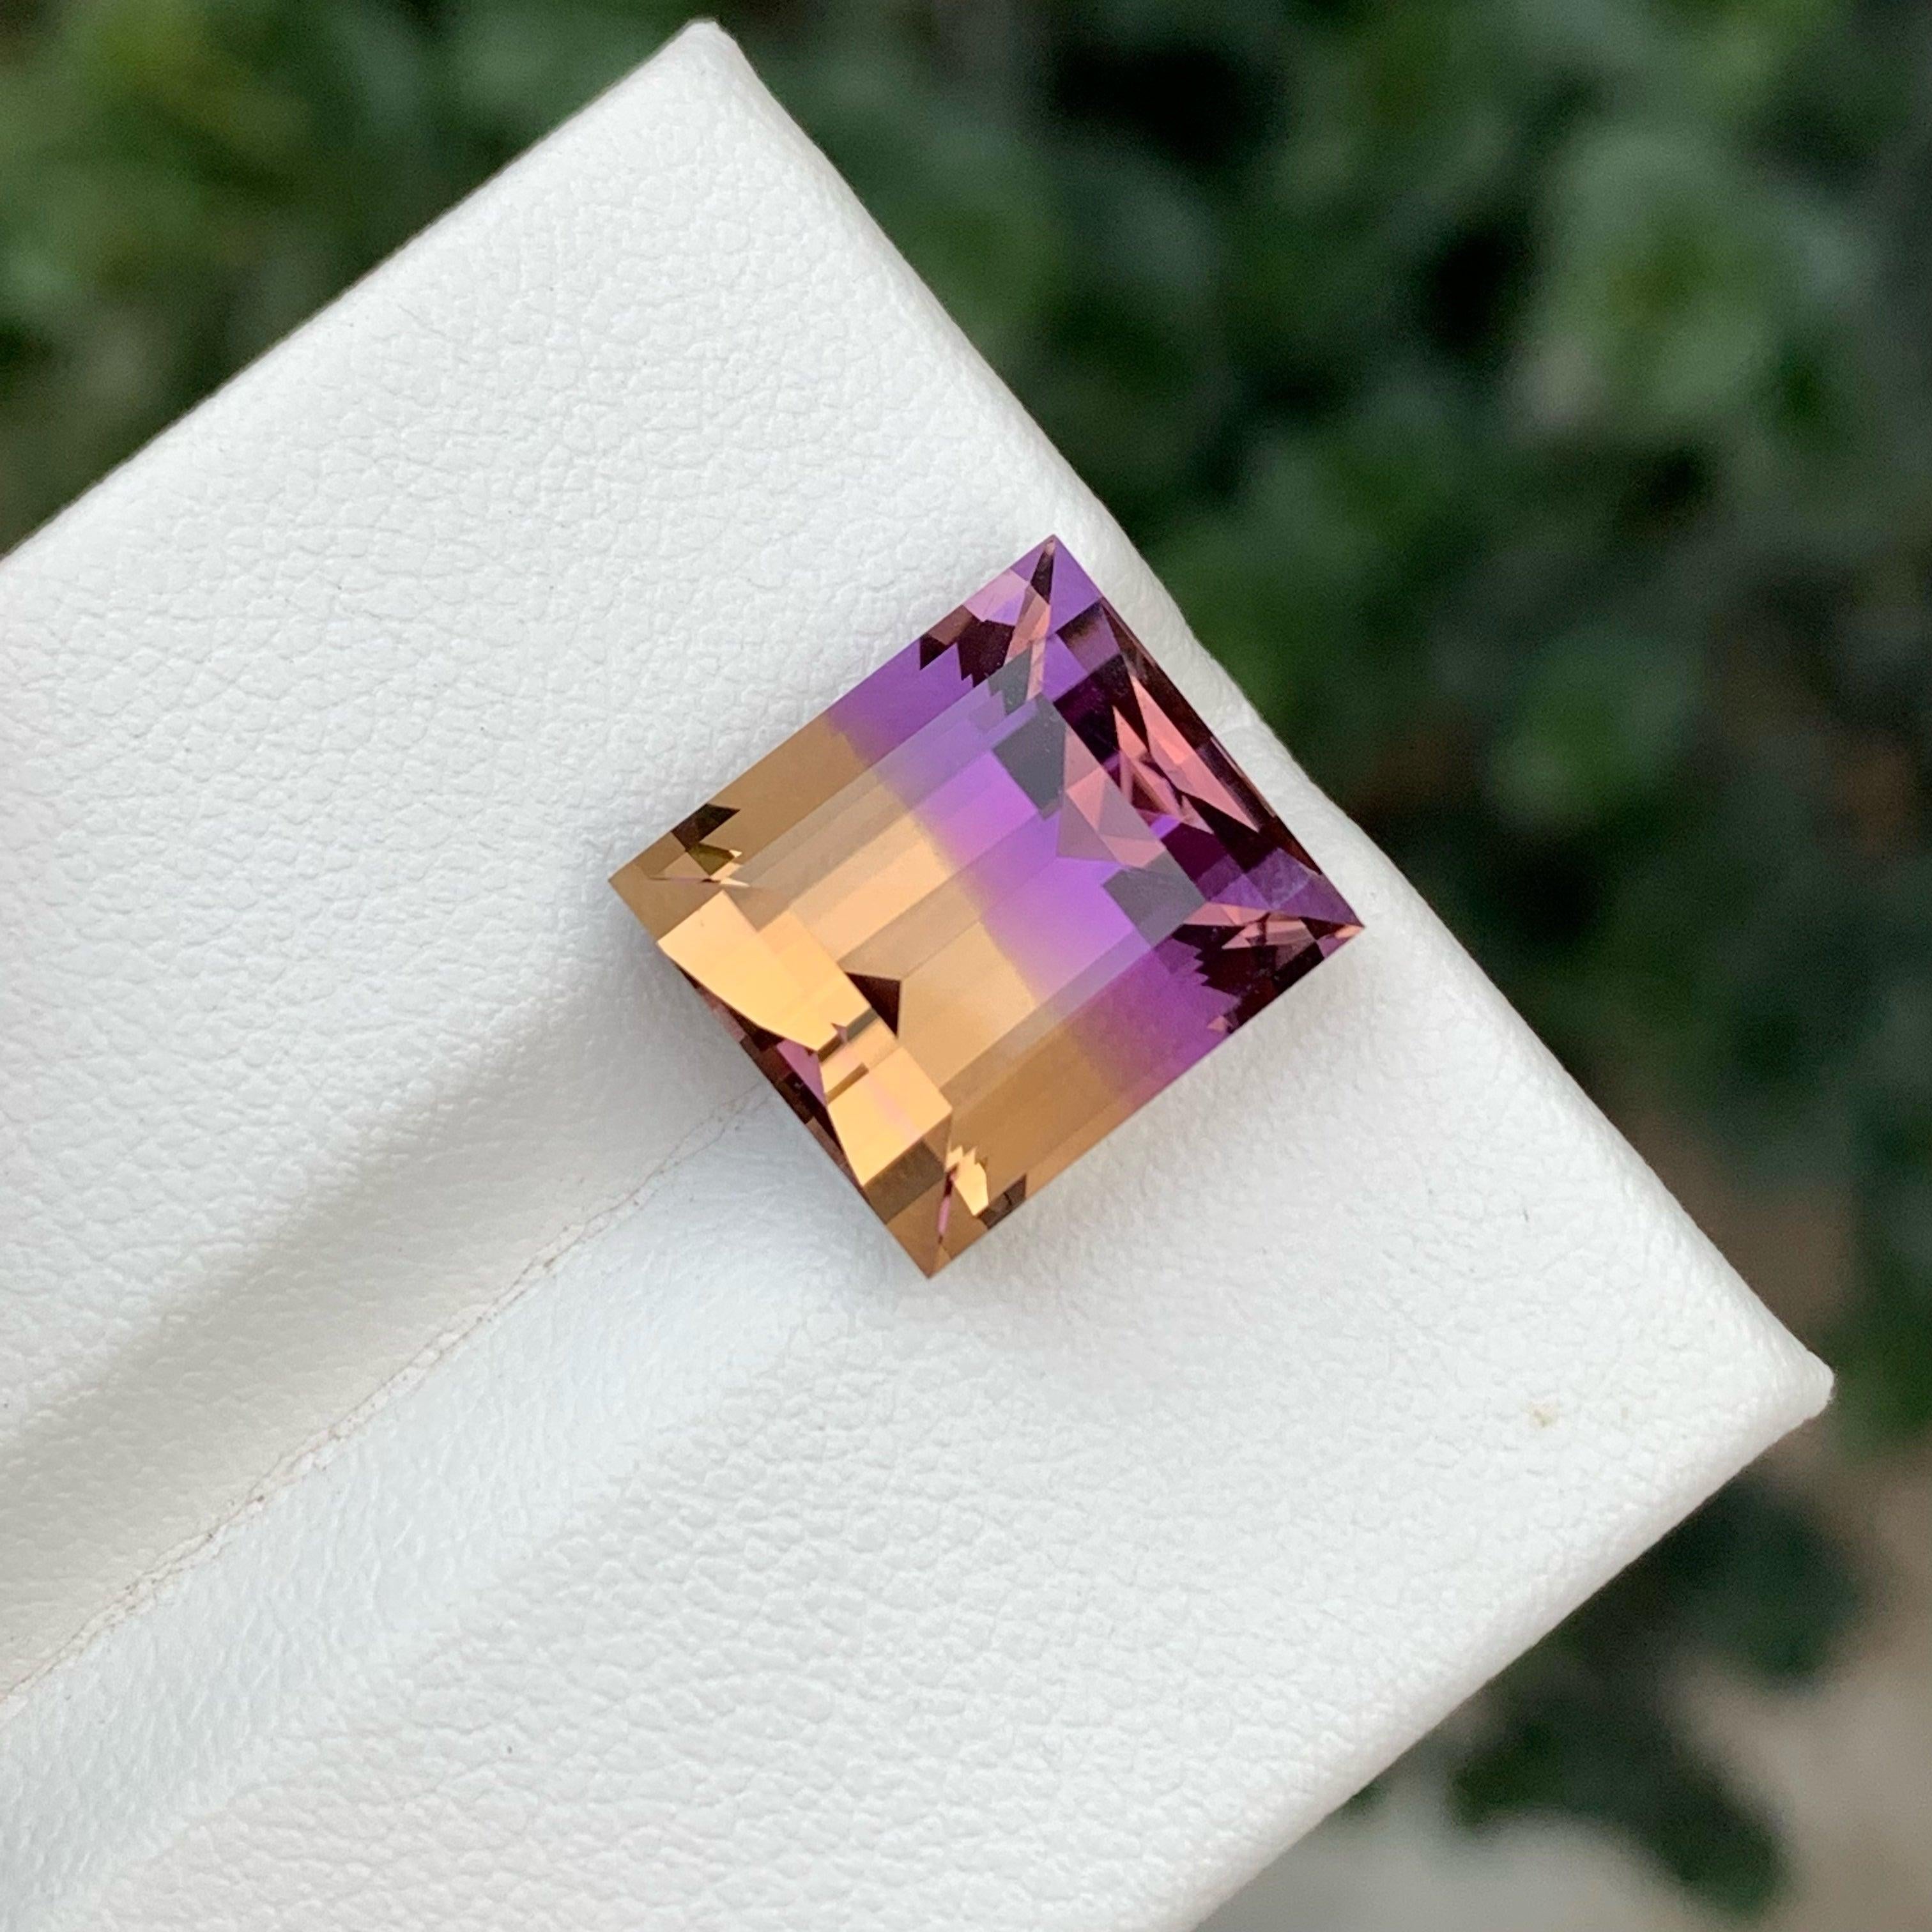 Fabulous Loose Ametrine Gemstone, Available for sale at wholesale price natural high quality 9.85 Carats Loupe Clean Clarity Natural Ametrine From Bolivia.

Product Information:
GEMSTONE TYPE:	Fabulous Loose Ametrine Gemstone
WEIGHT:	9.85